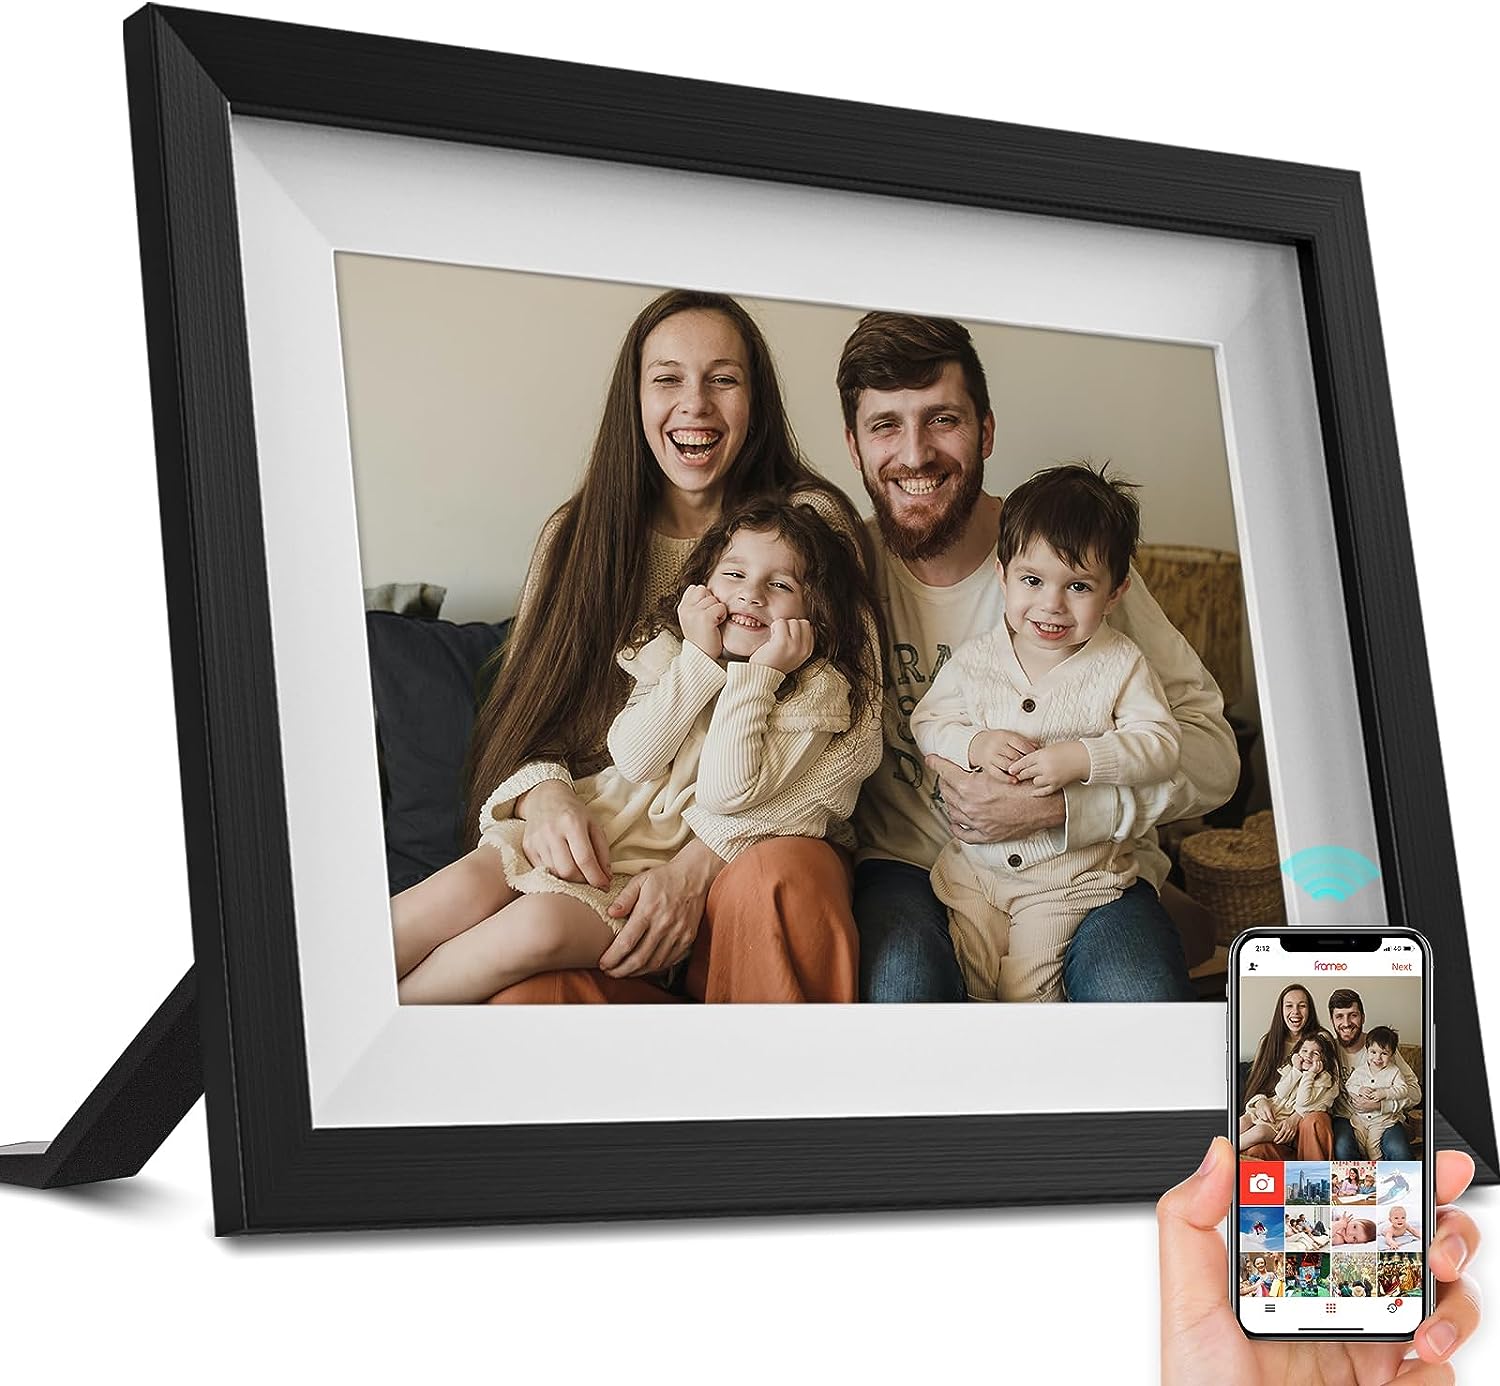 Amaboo 10.1 Inch WiFi Smart Cloud Digital Picture Frame, Electronic Photo Frame with IPS LCD Touch Screen HD Display, Auto Rotate, Share Photos or Videos via Frameo APP